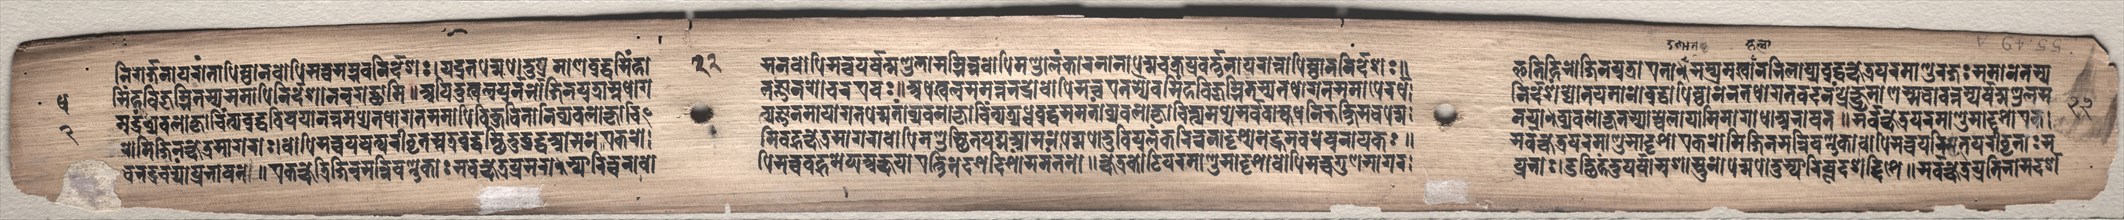 Leaf from Gandavyuha: text, from Chapter 2 (verso), 1000-1100s. Eastern India, Pala period. Ink and